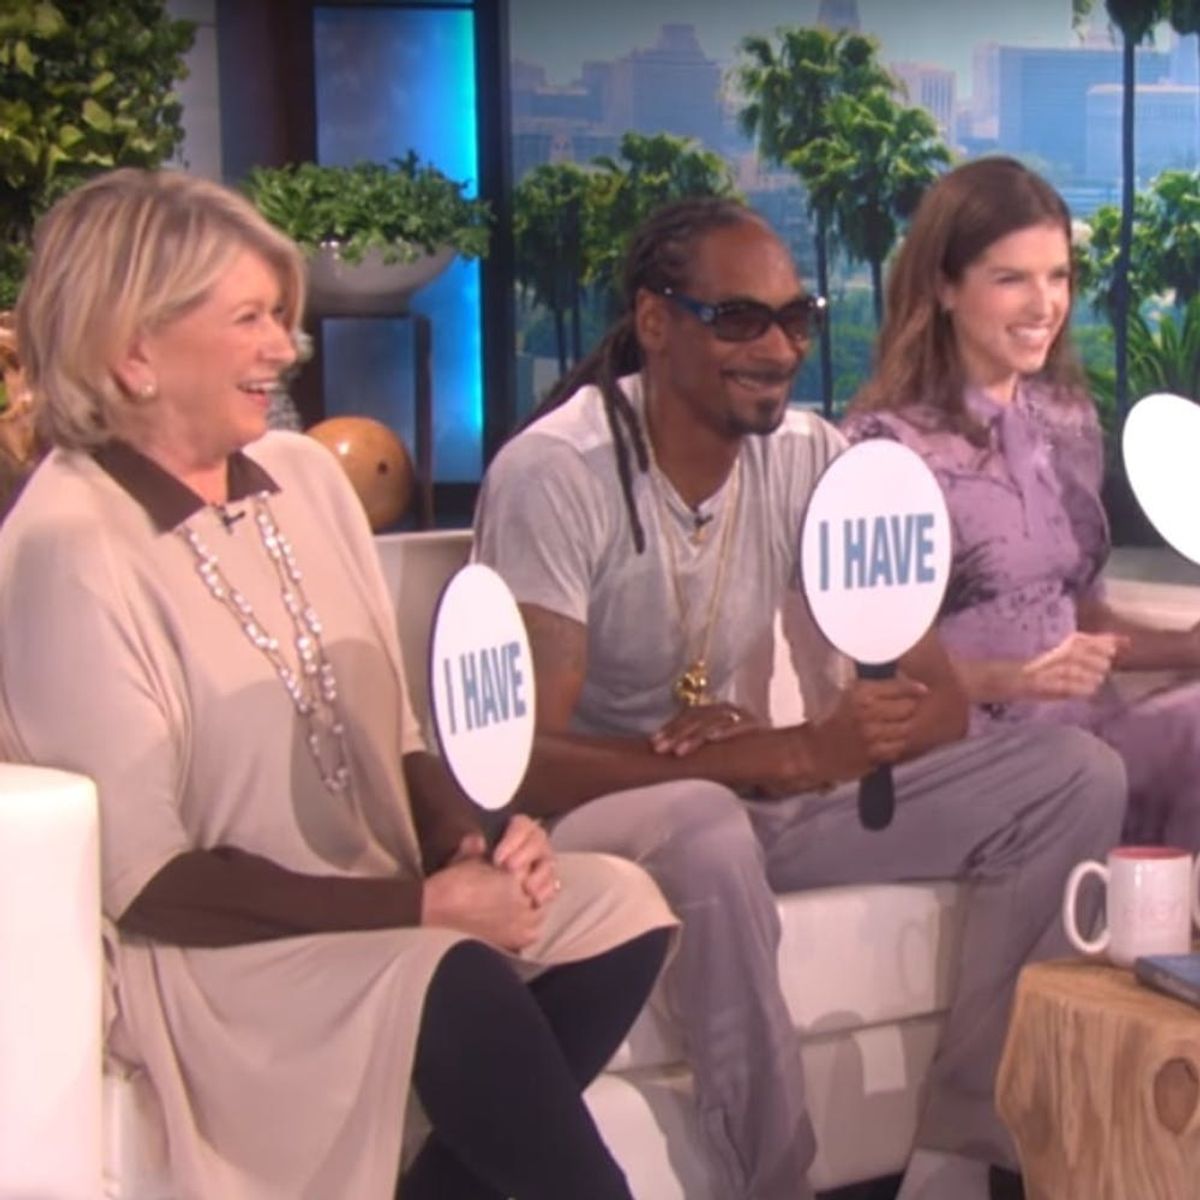 Whoa! Martha Stewart, Snoop Dogg and Anna Kendrick’s “Never Have I Ever” Answers Will Leave You SHOCKED